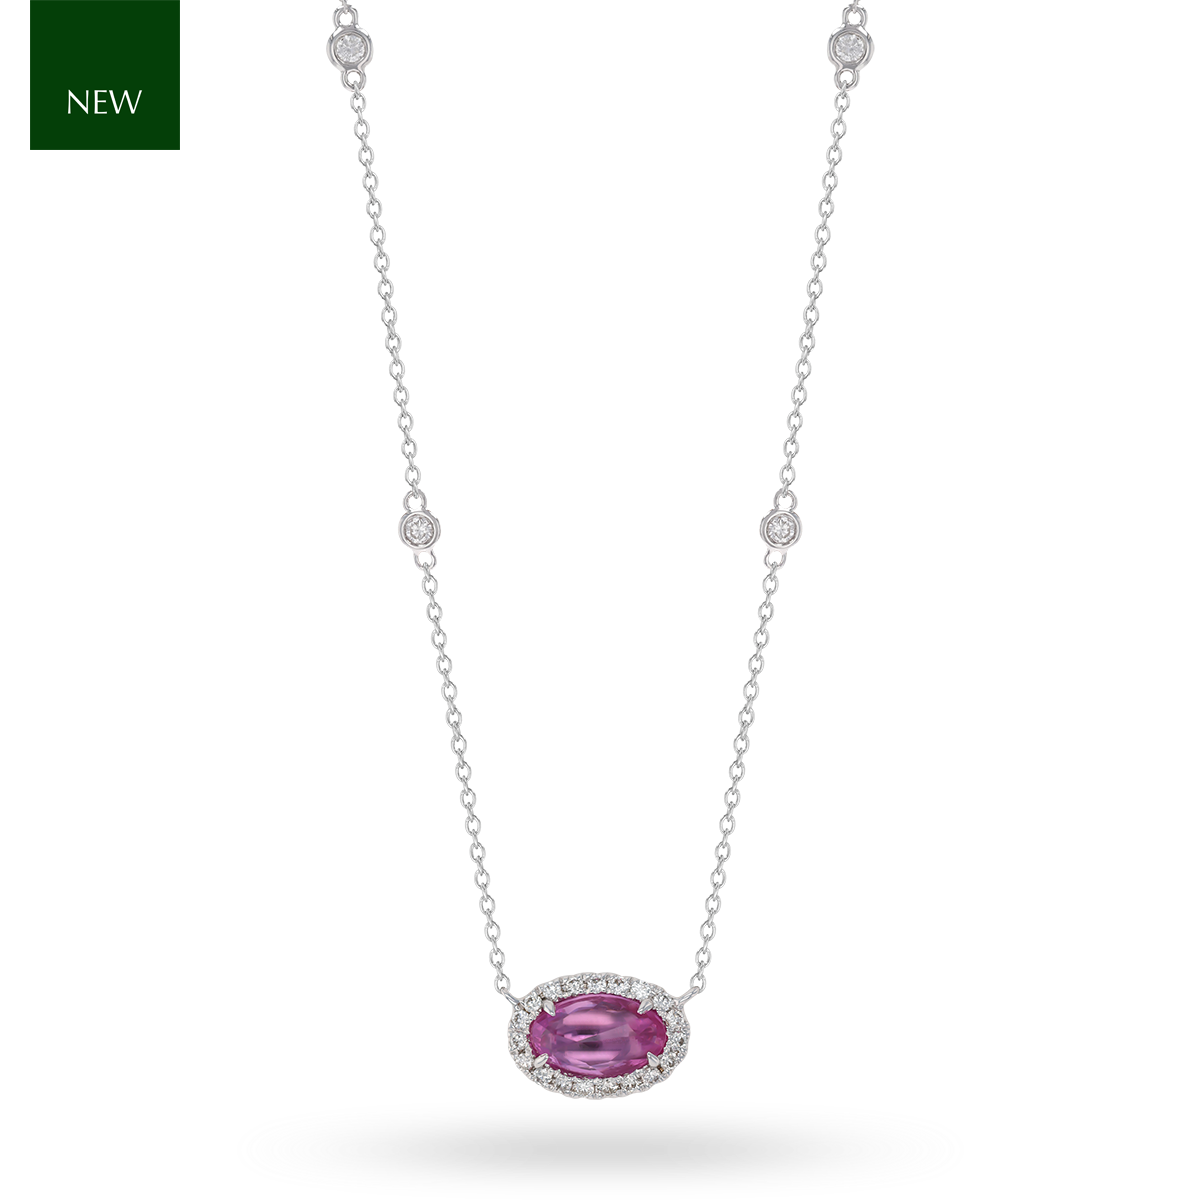 18ct White Gold Rose Cut Pink Sapphire & Diamond Halo Necklace